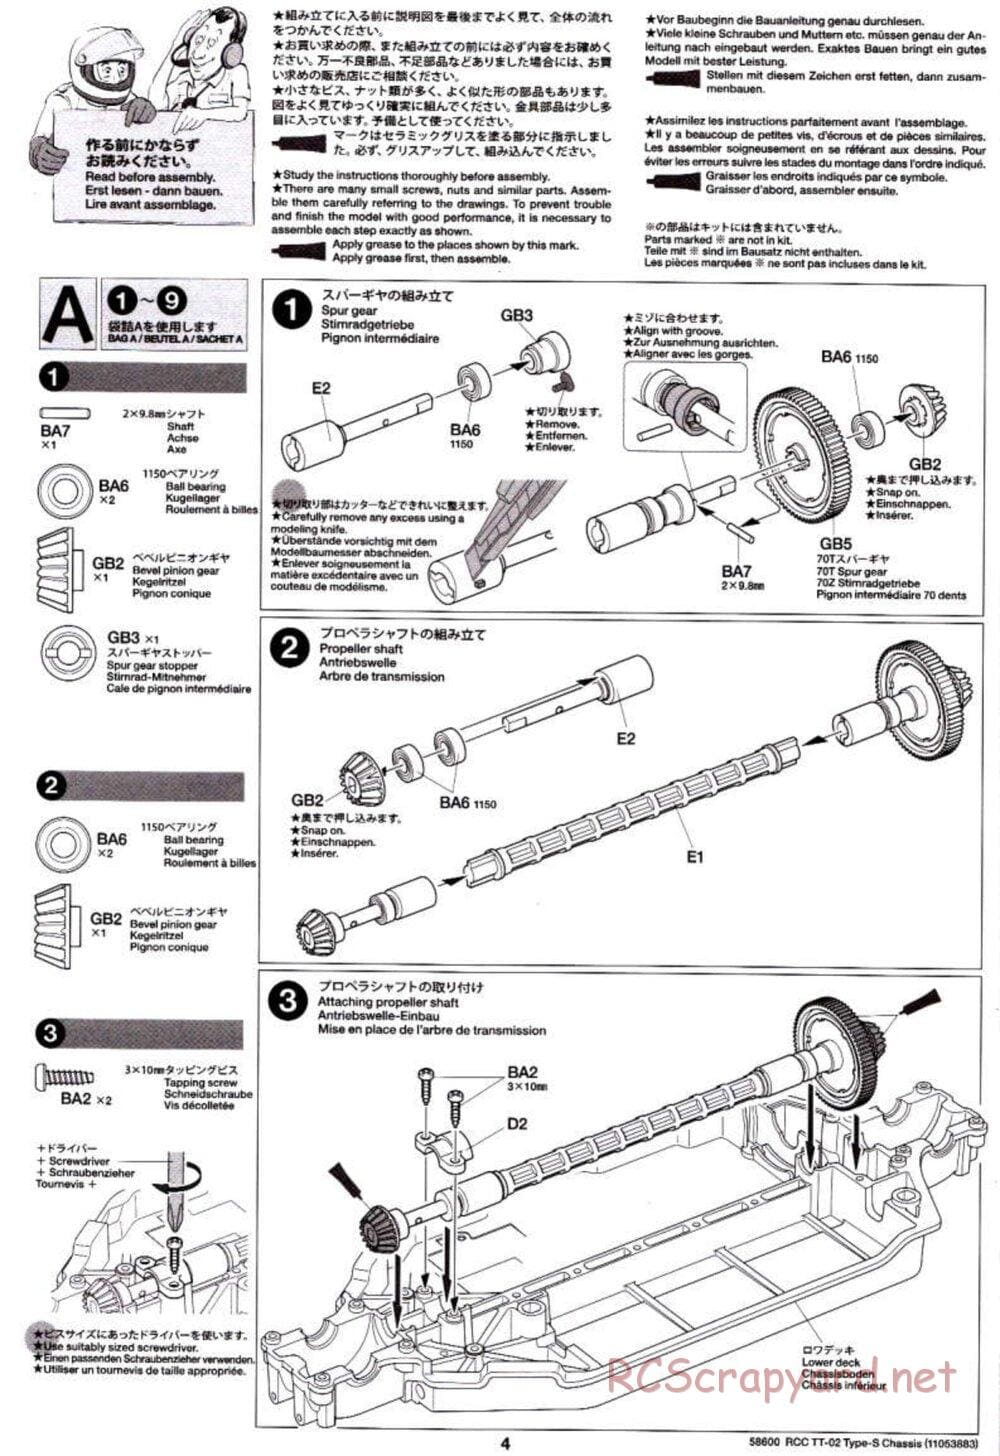 Tamiya - TT-02 Type-S Chassis - Manual - Page 4